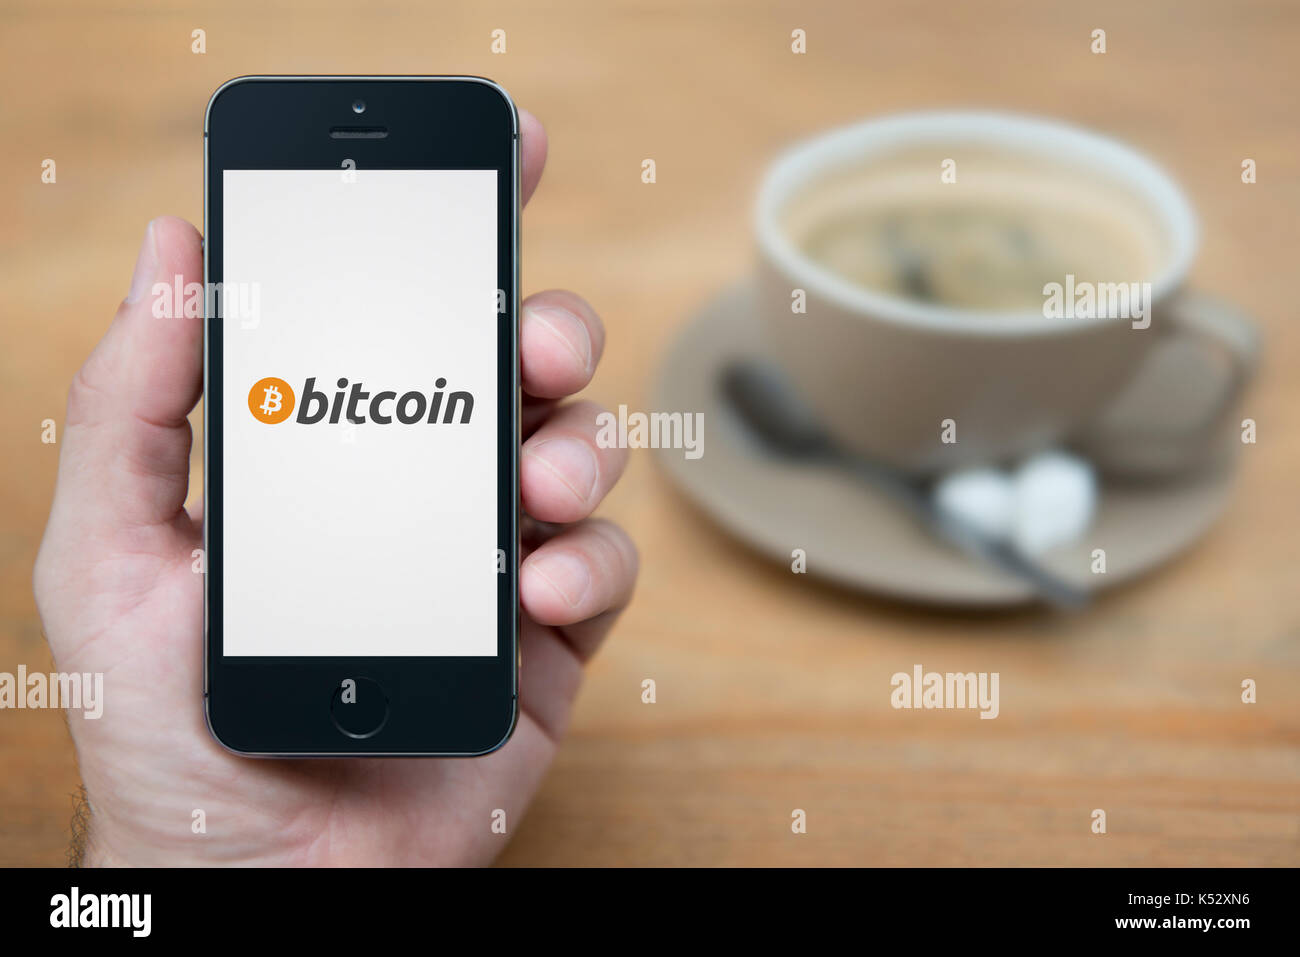 A man looks at his iPhone which displays the Bitcoin logo (Editorial use only). Stock Photo